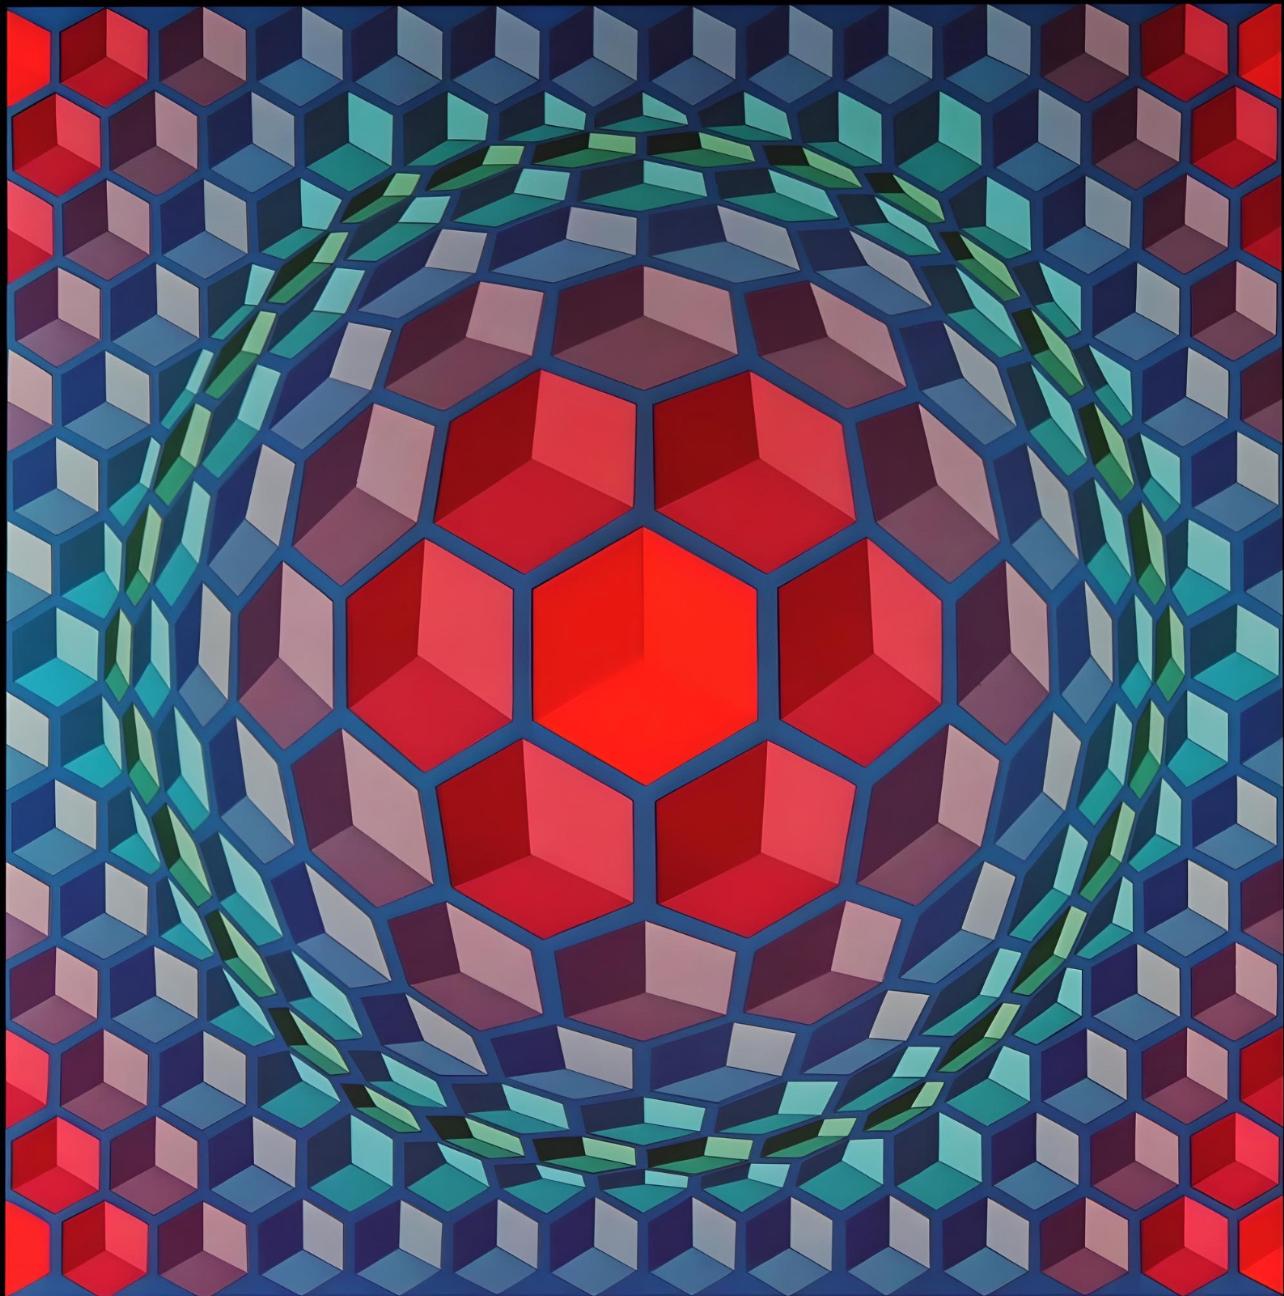 Vasarely, Composition, Structures universelles de l'Hexagone (after) - Print by Victor Vasarely